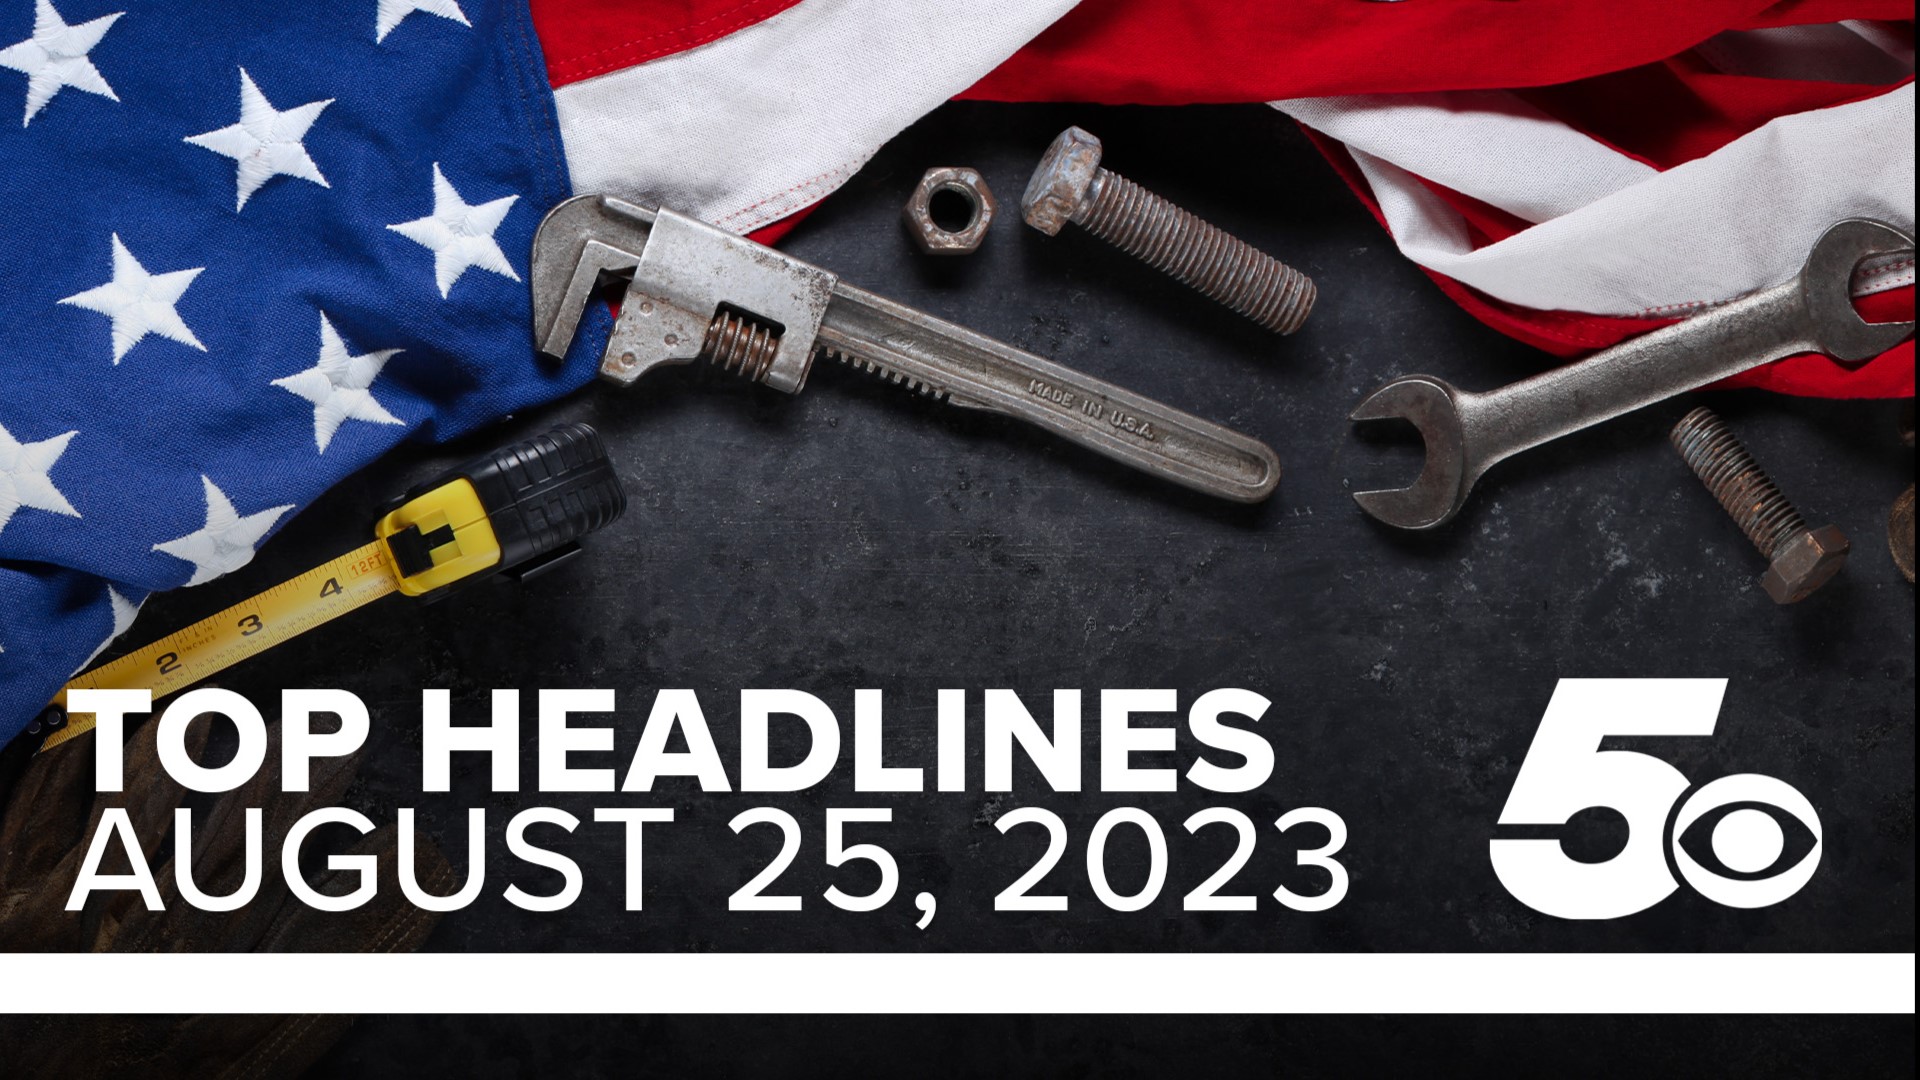 Watch the 5NEWS Top Headlines to see what's going on this Labor Day.